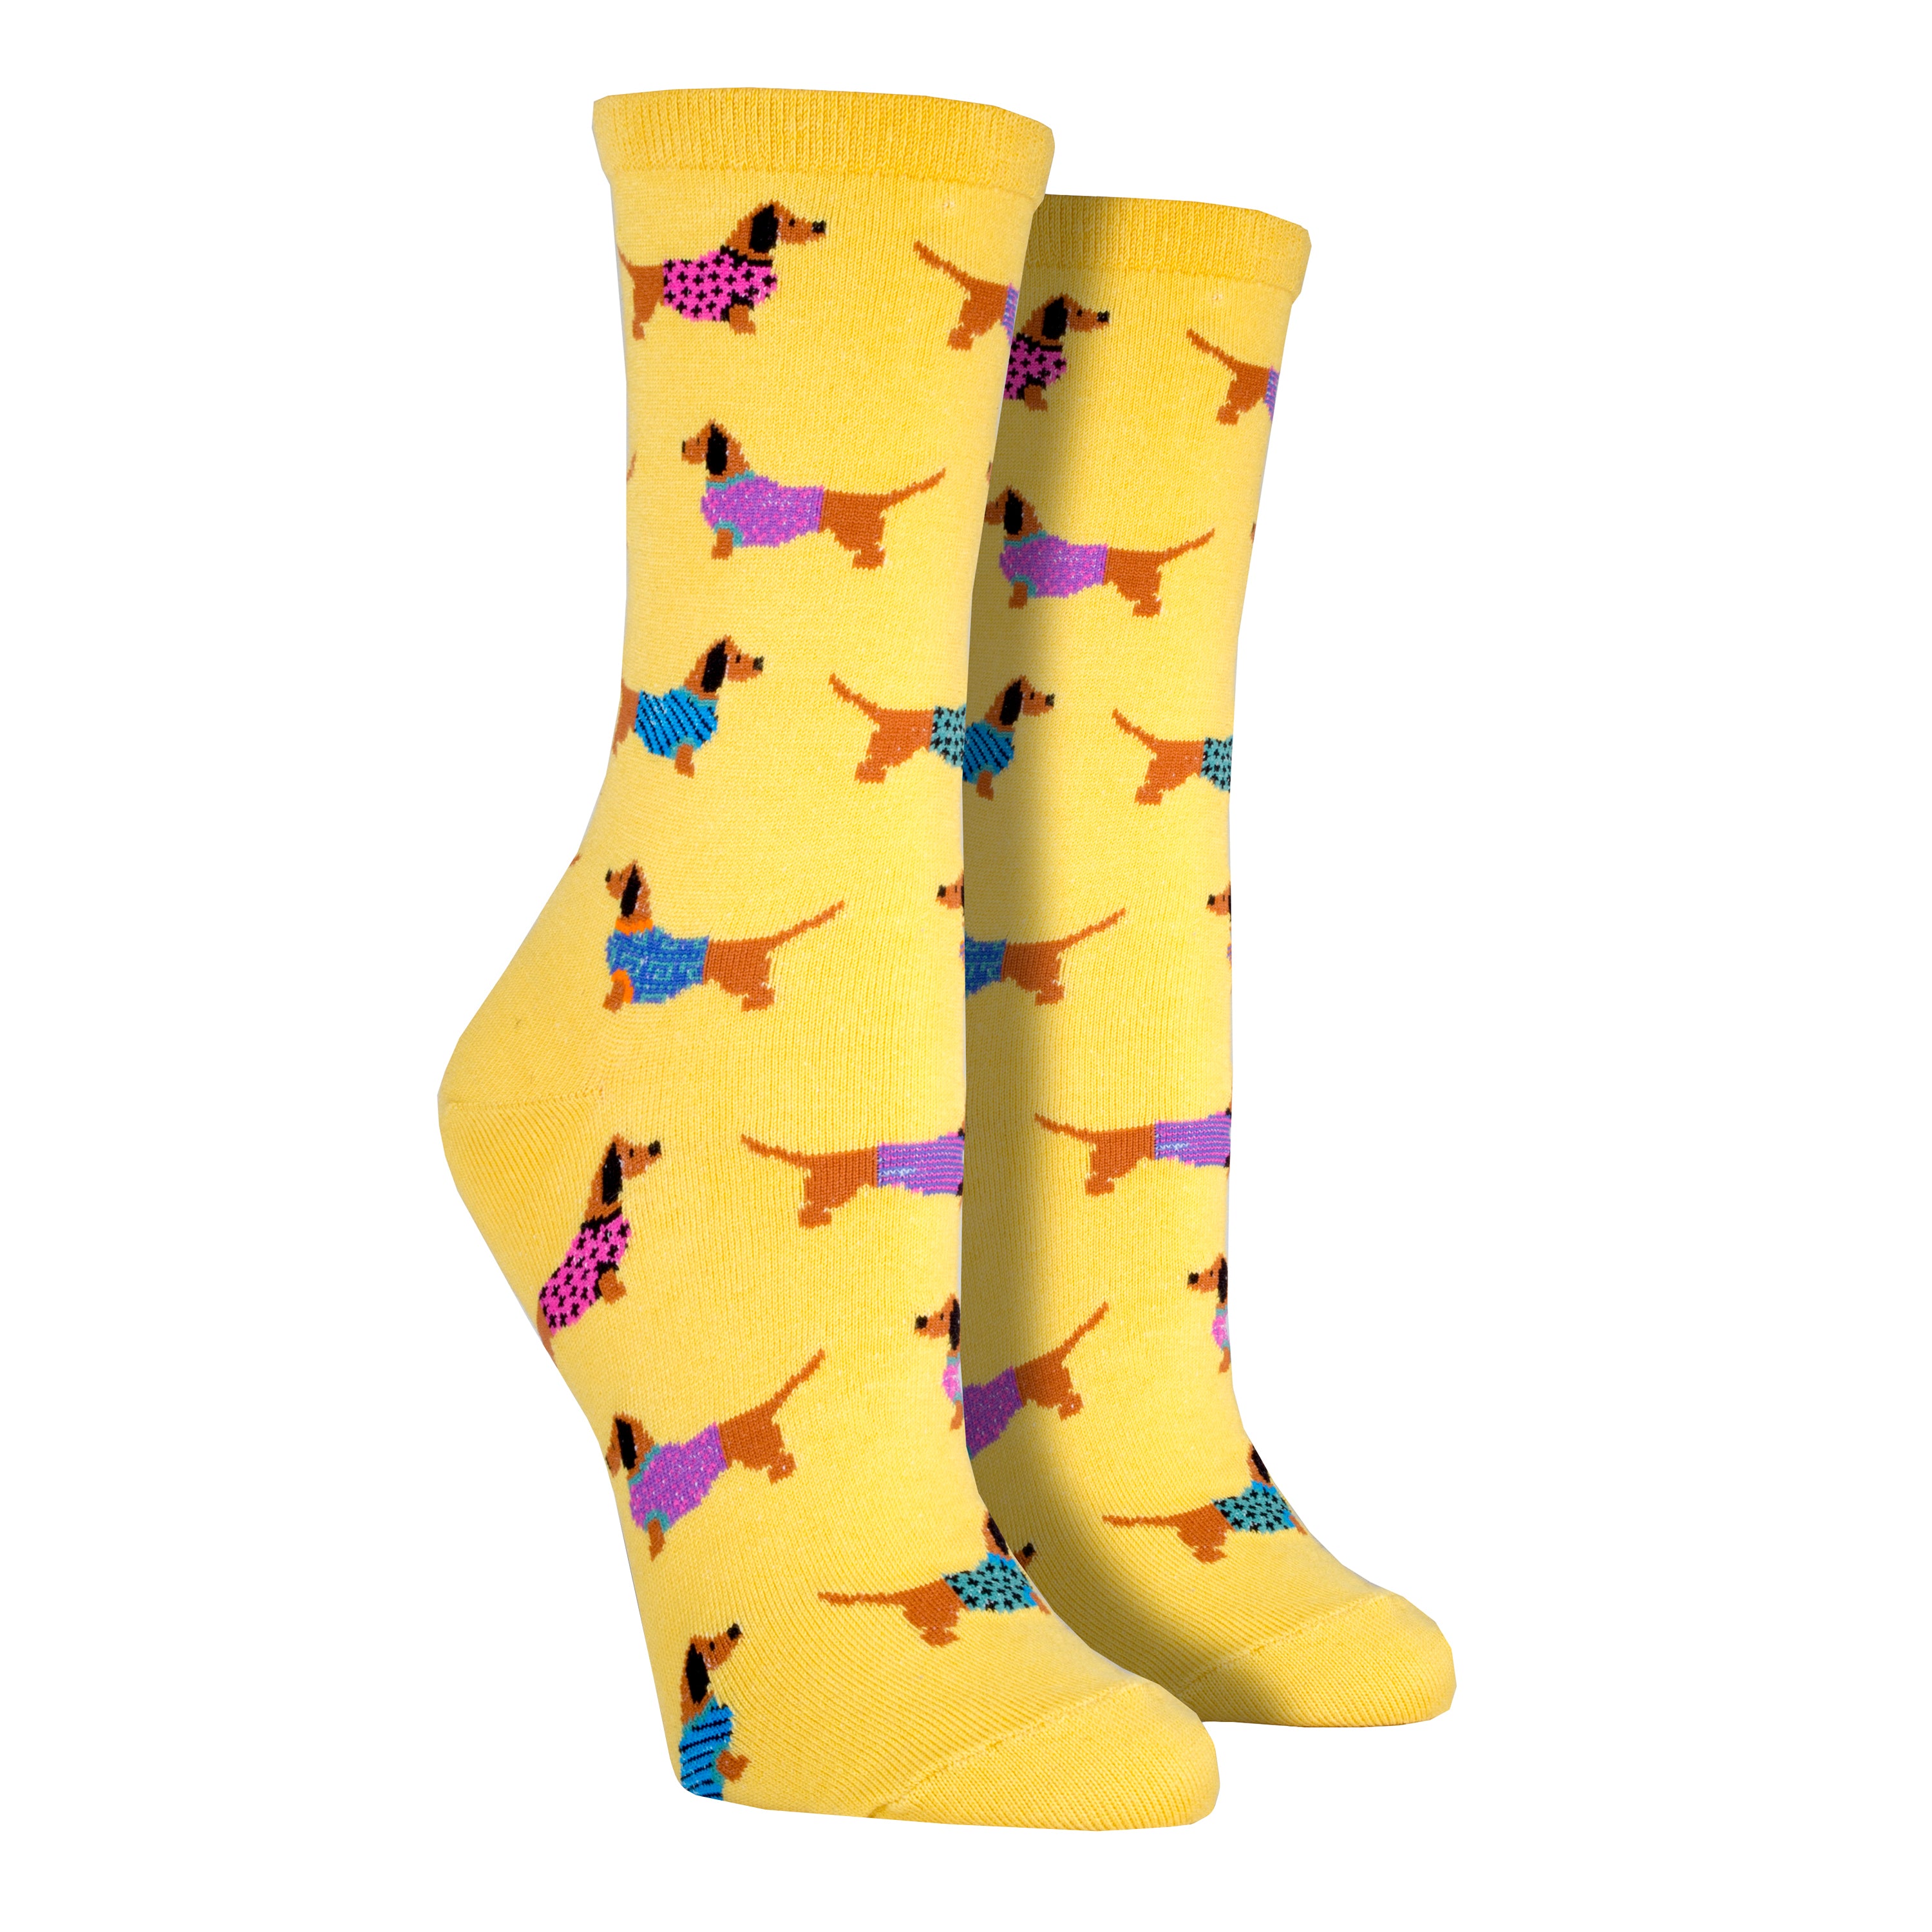 Shown on foot forms, a pair of women's SockSmith brand cotton crew socks in yellow with an all over motif of dachshund dogs in colorful sweaters.